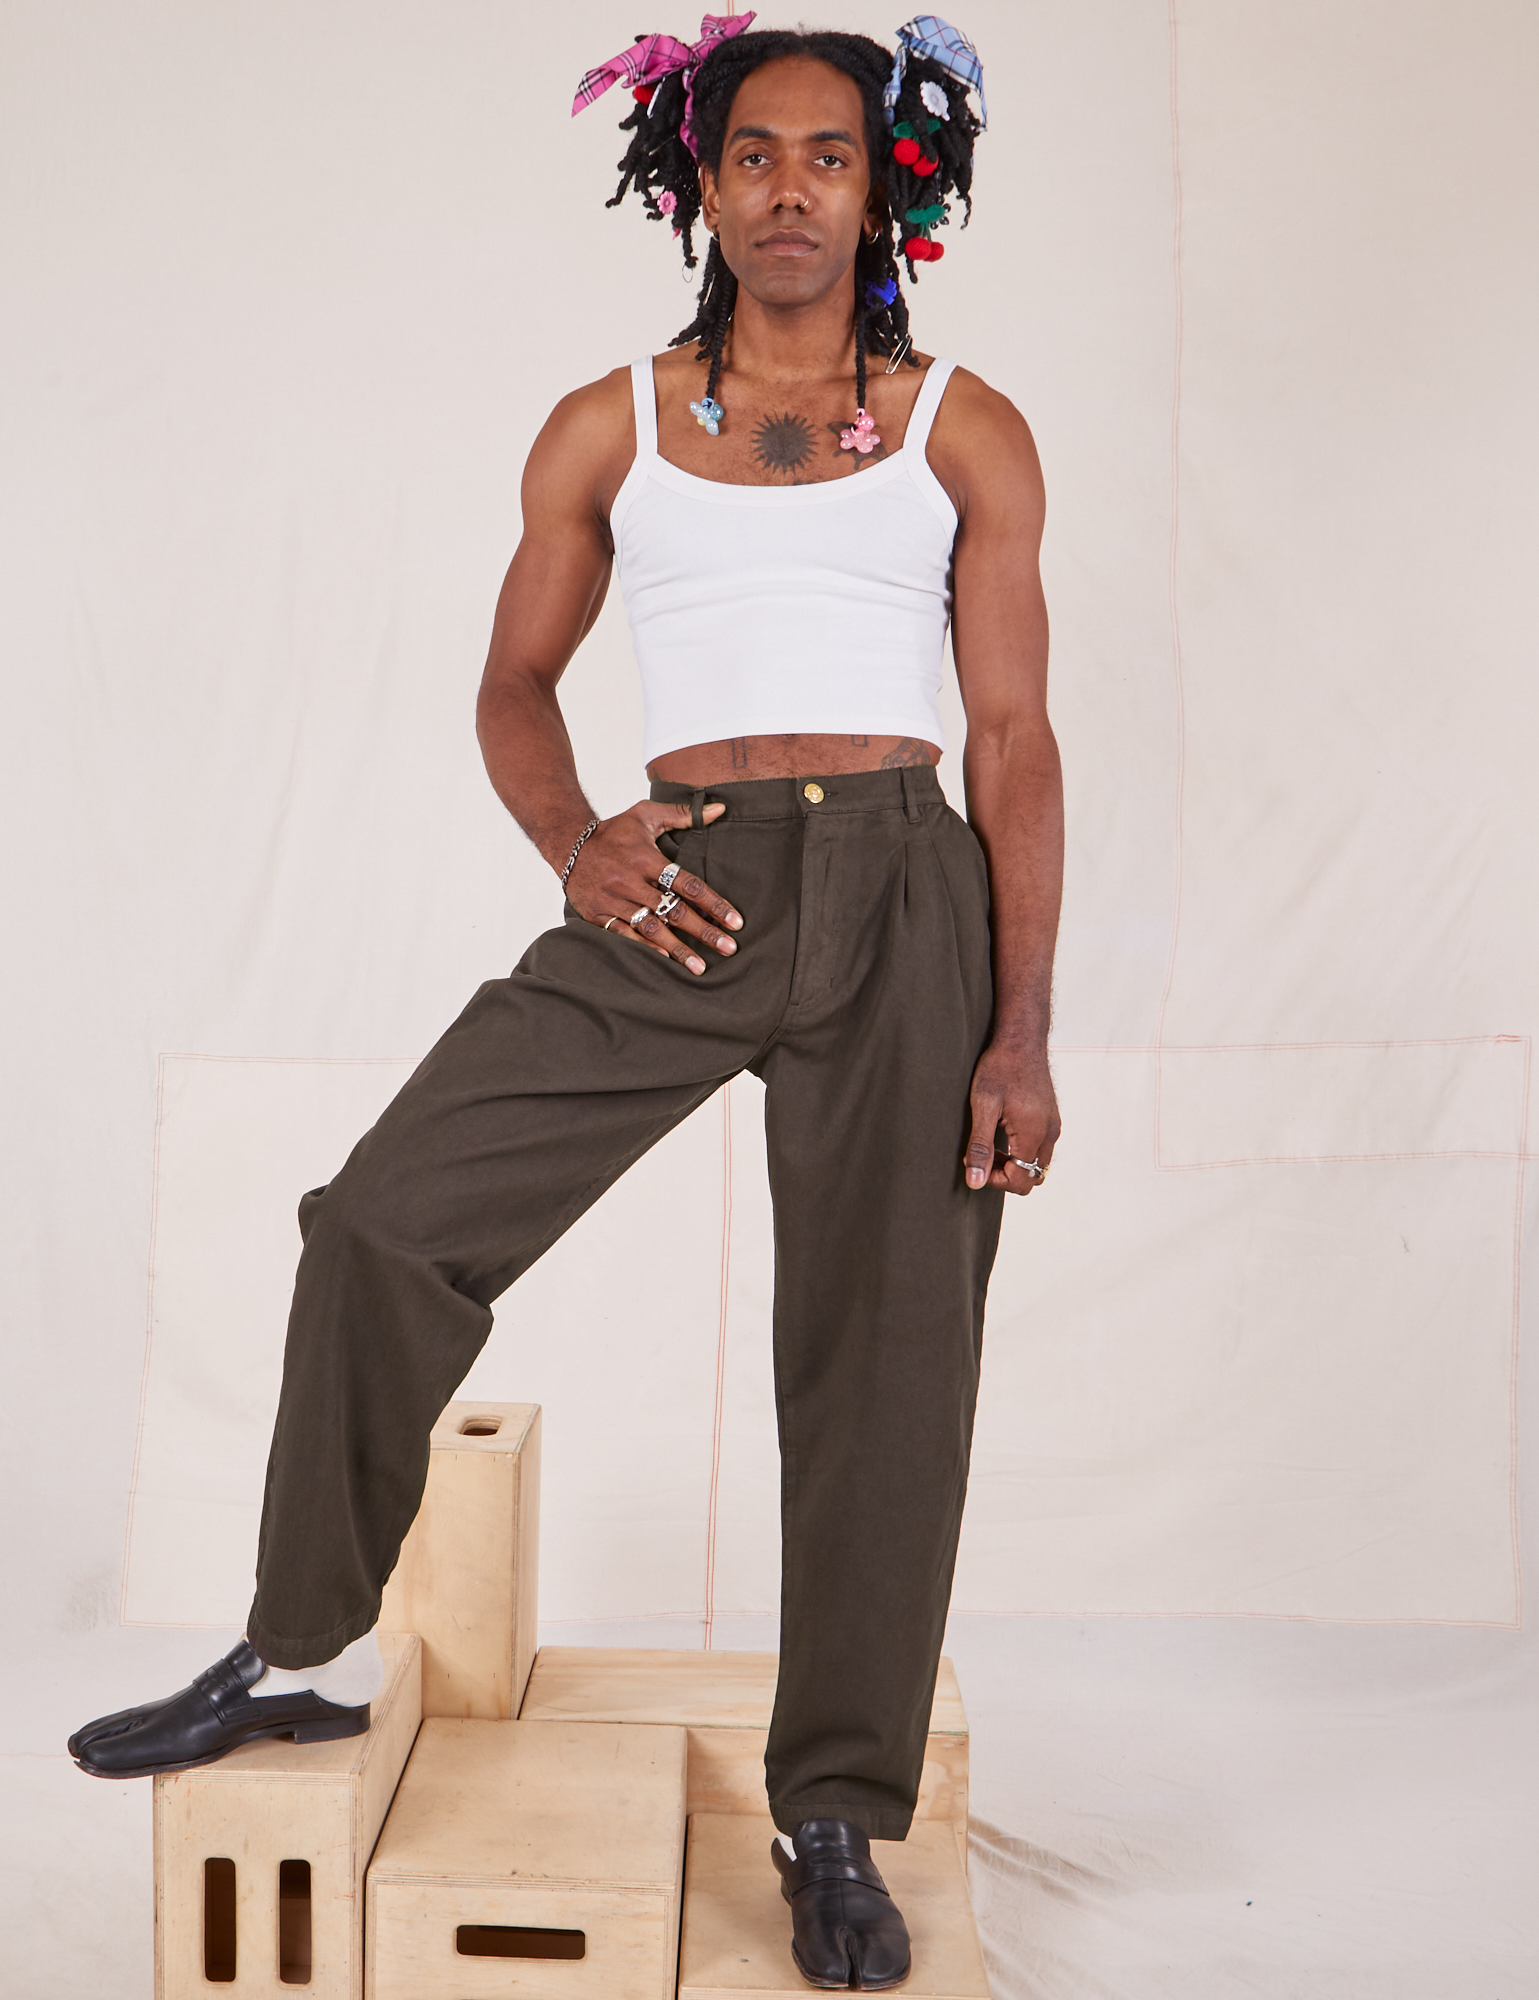 Jerrod is 6&#39;3&quot; and wearing S Long Heavyweight Trousers in Espresso Brown paired with vintage off-white Cami